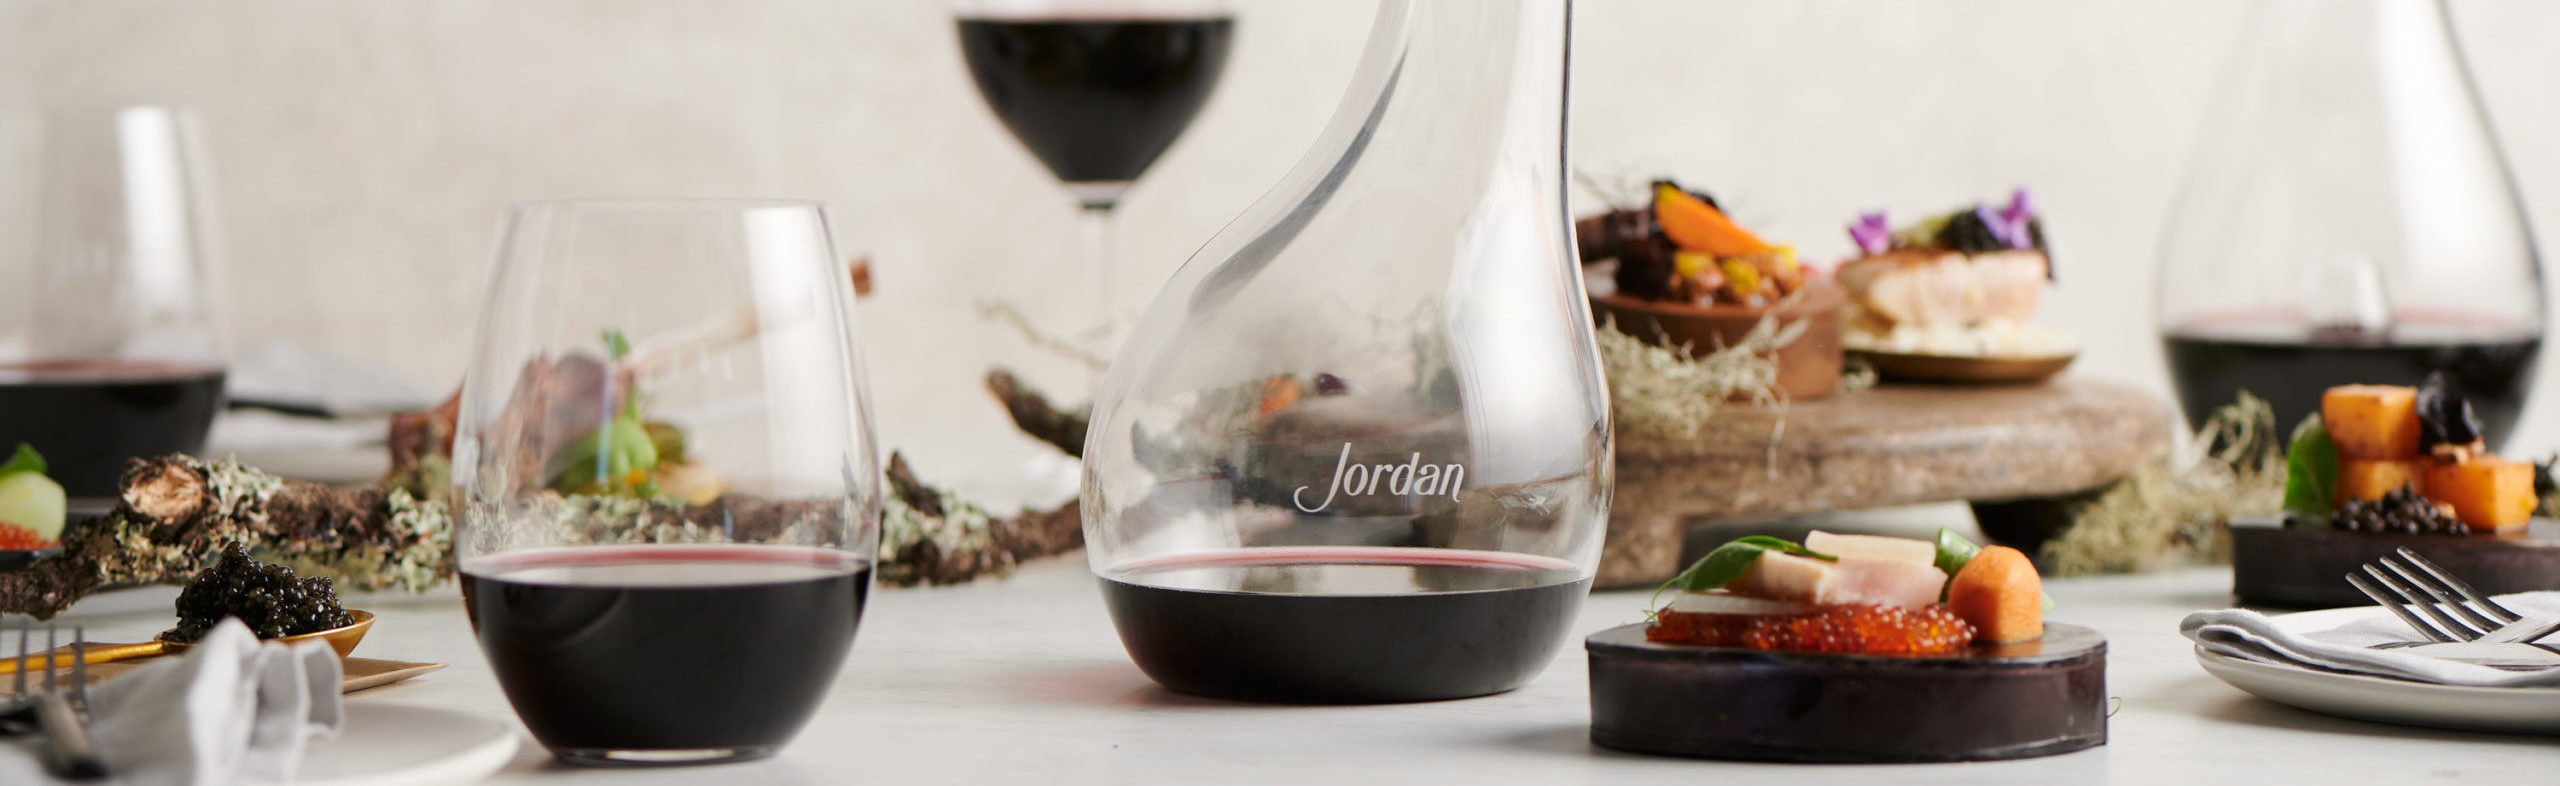 Wine glasses and a bottle on a table - luxury wine accessories at